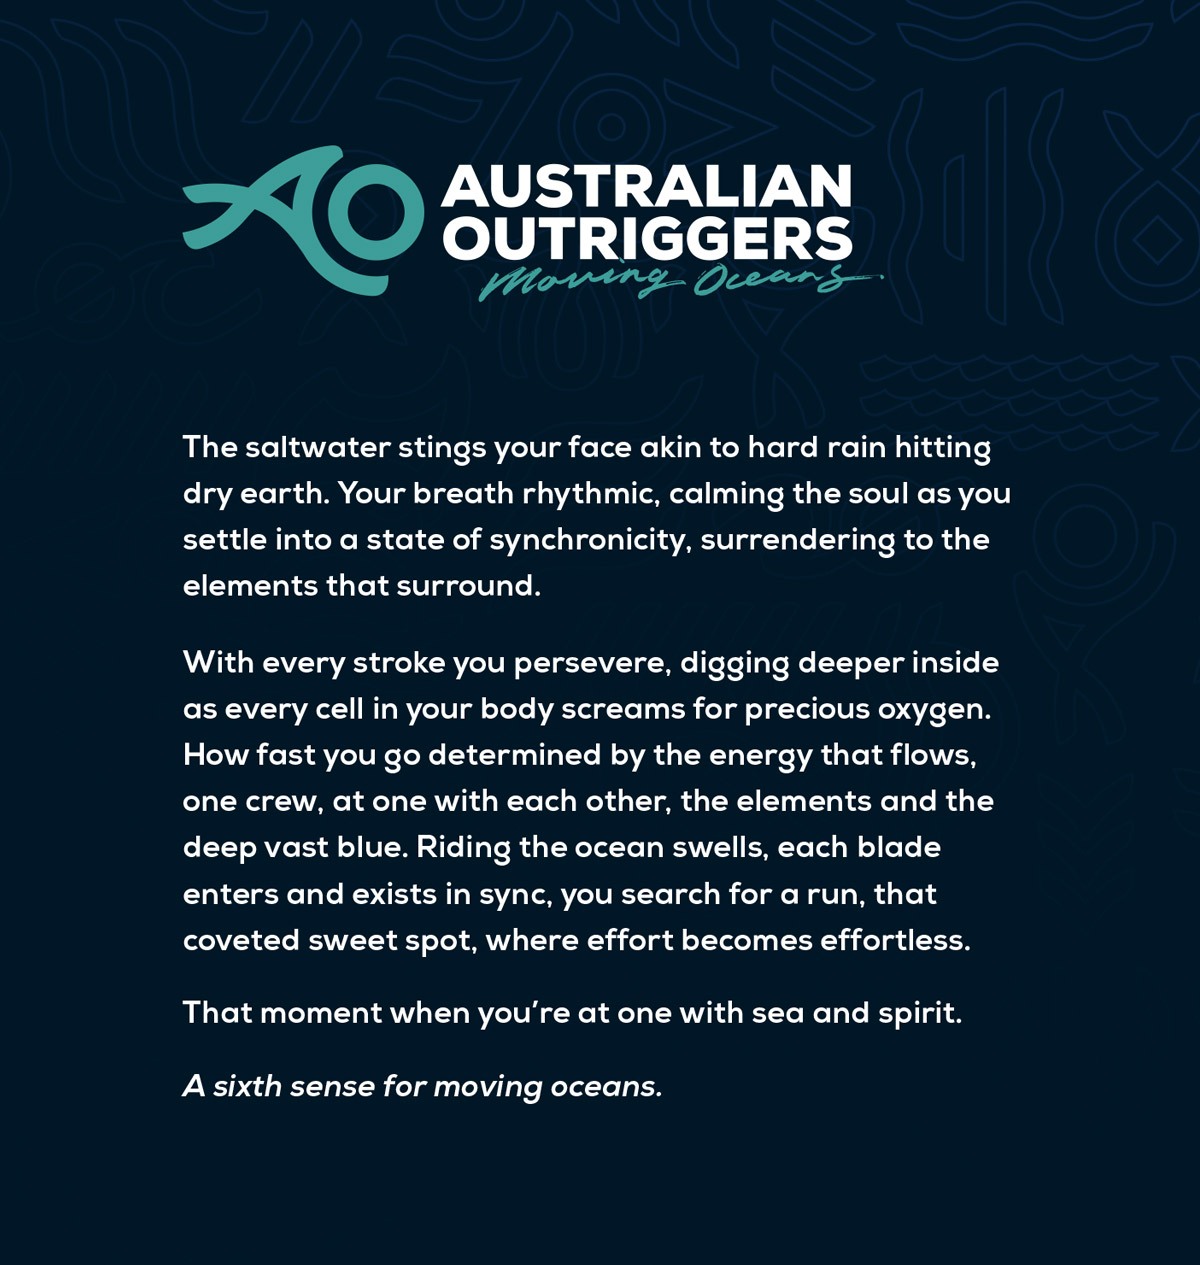 Australian Outriggers | Brand Stories